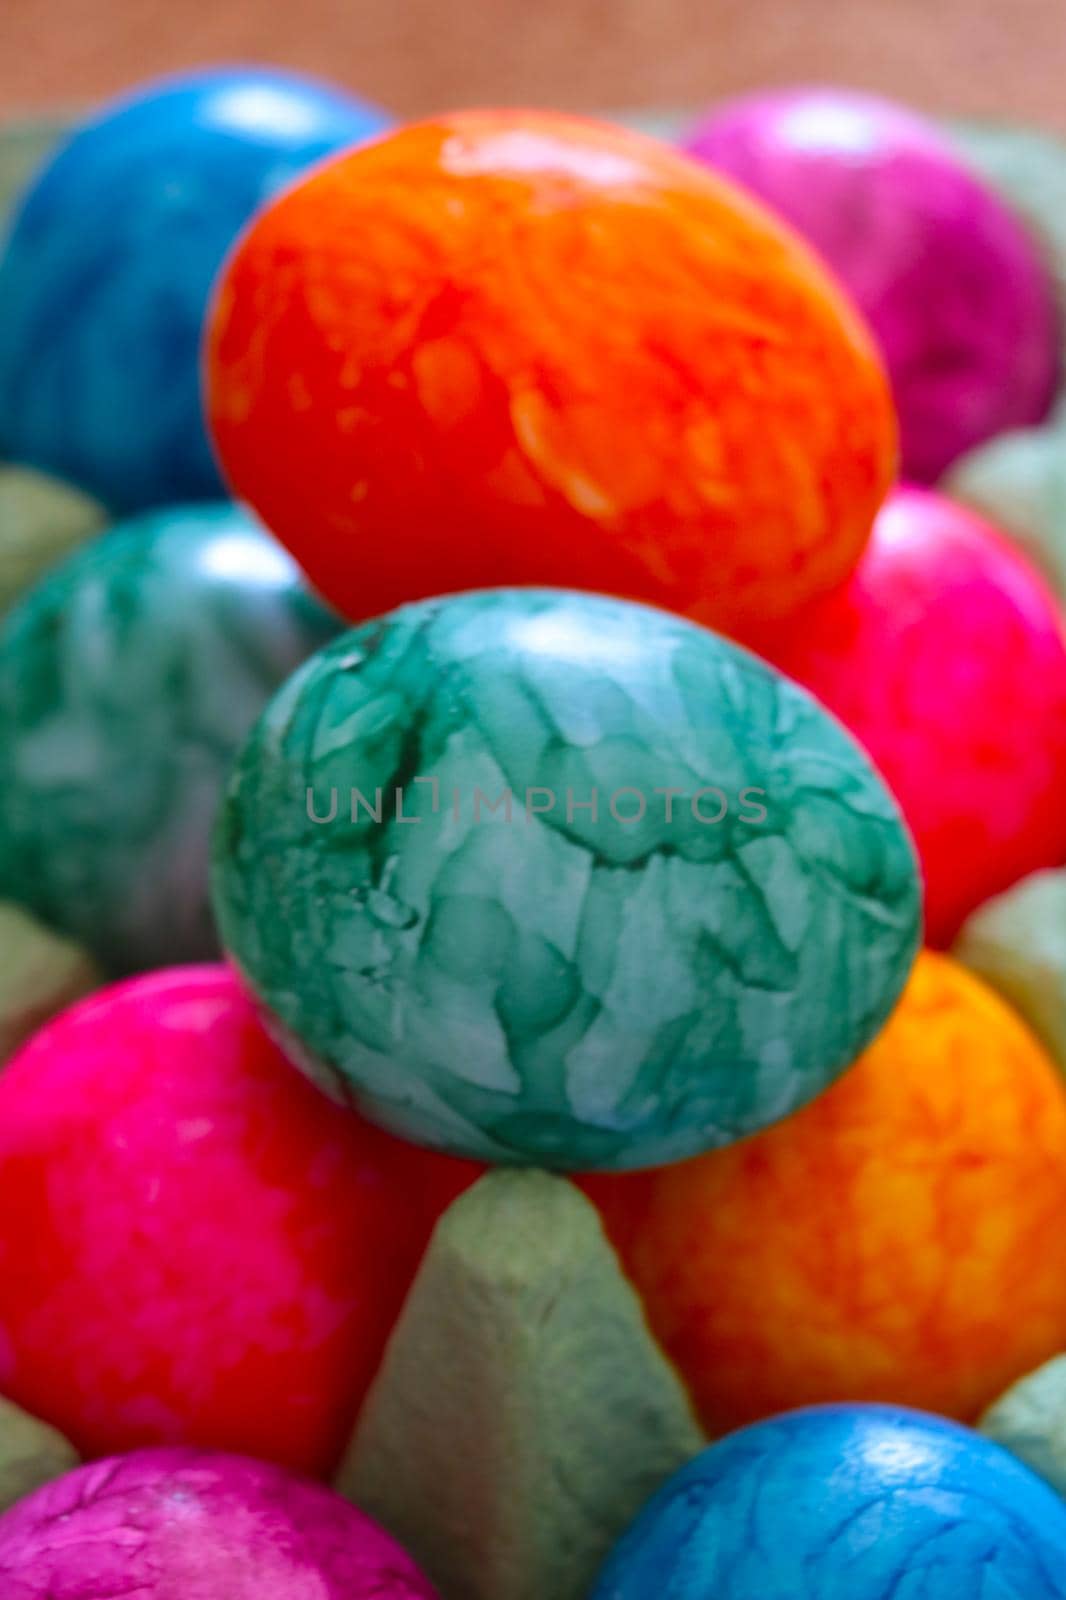 Out of focus, blurry background, beautiful bright Easter eggs. by kip02kas